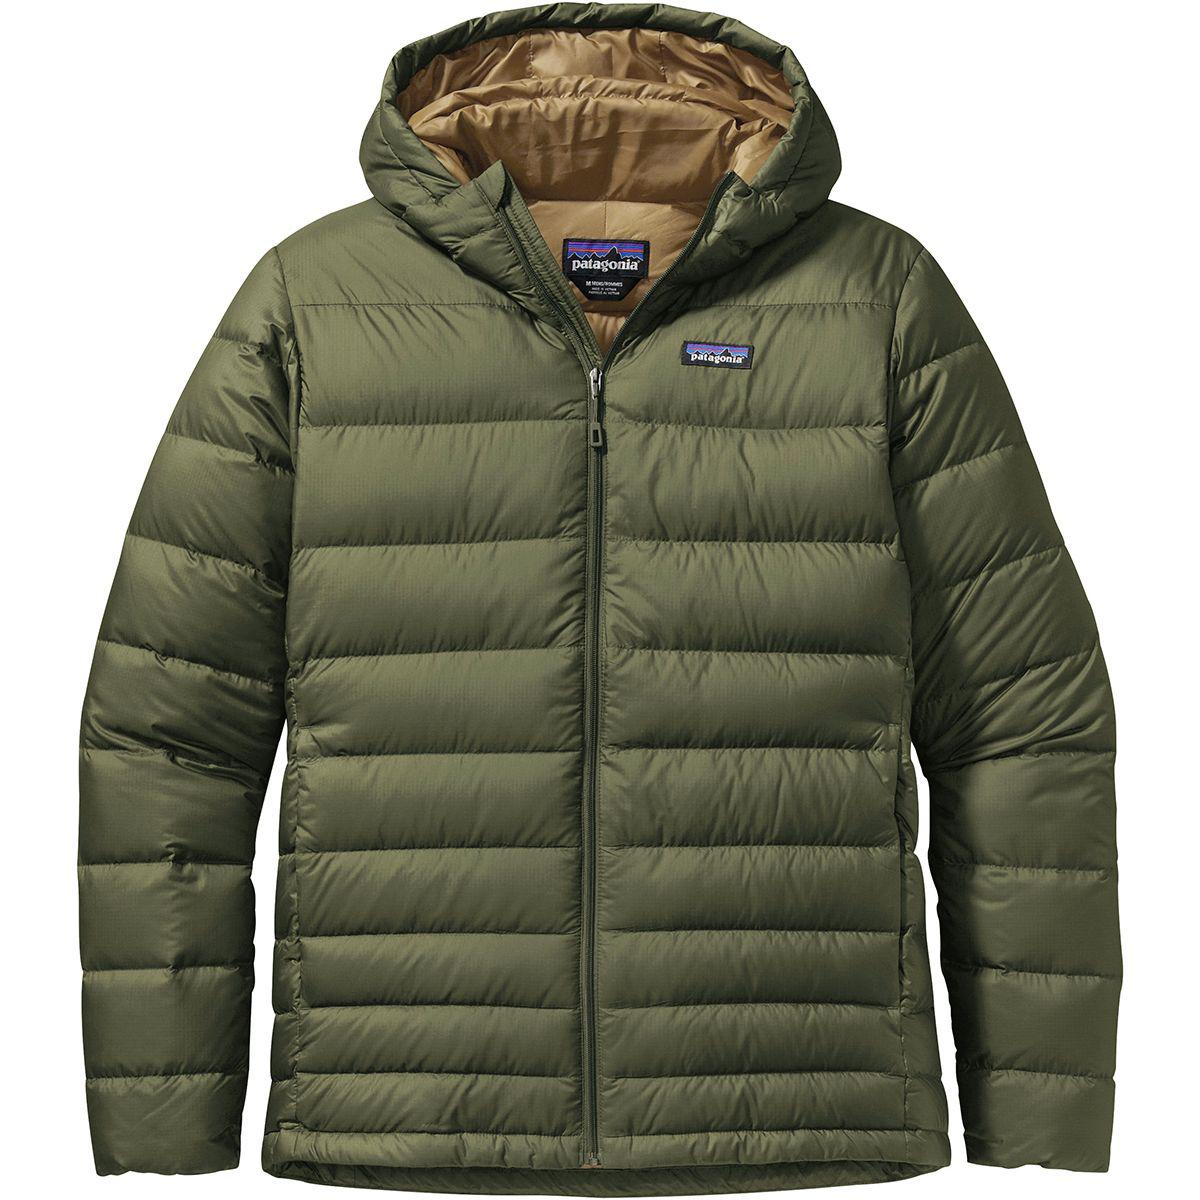 Patagonia Goose Hi-loft Hooded Down Sweater Jacket in Green for Men - Lyst